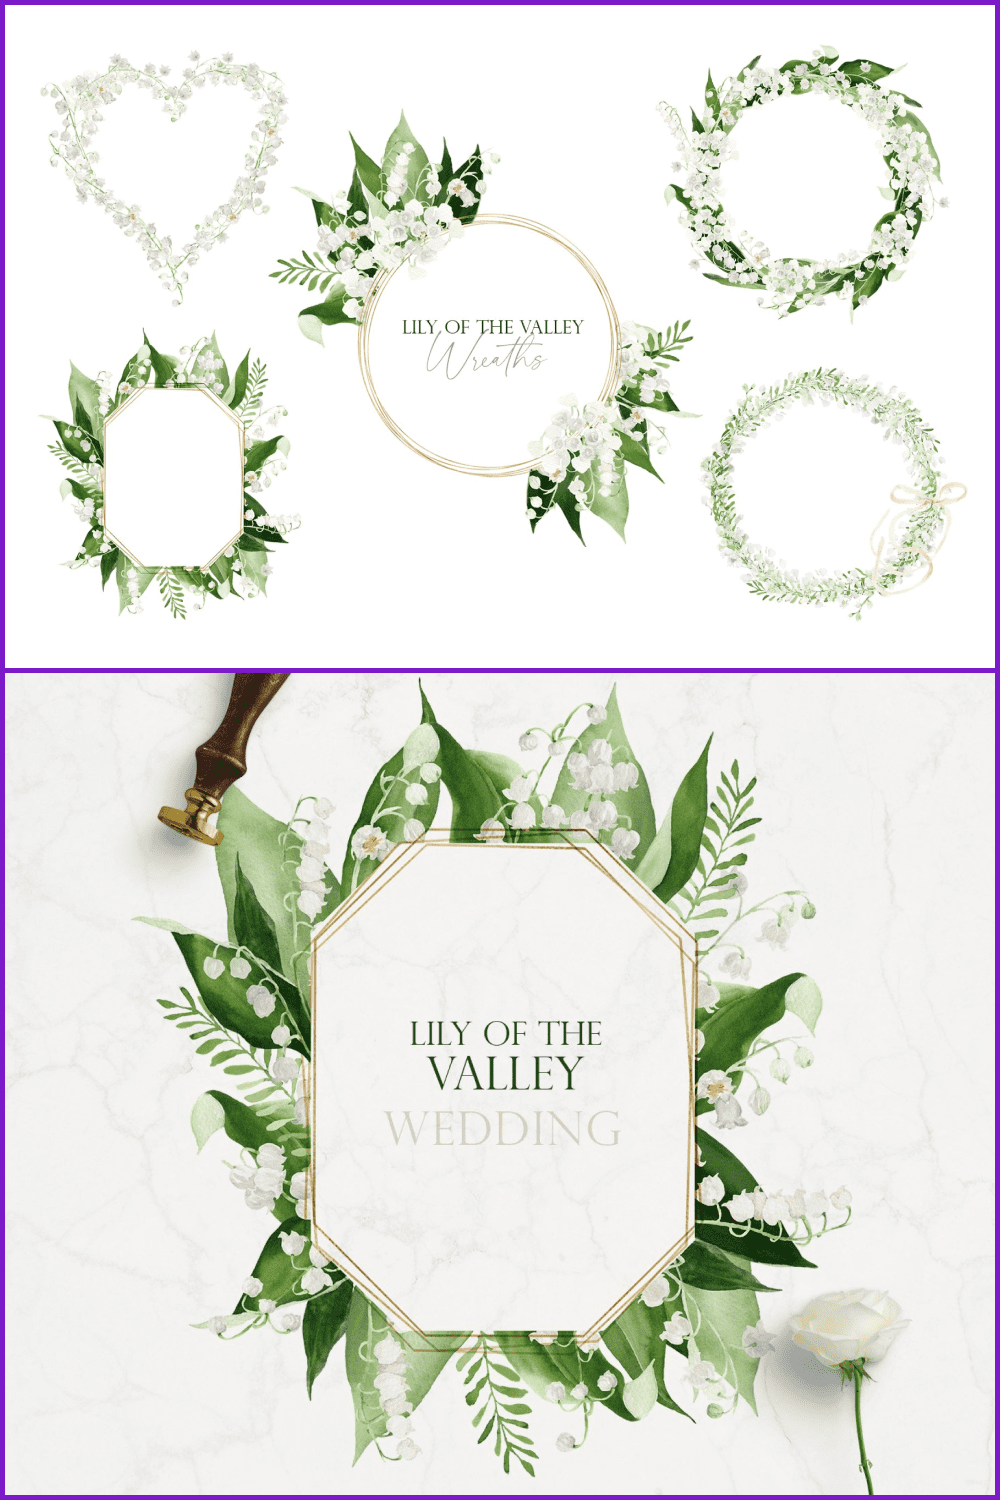 Frames with green and white flowers.